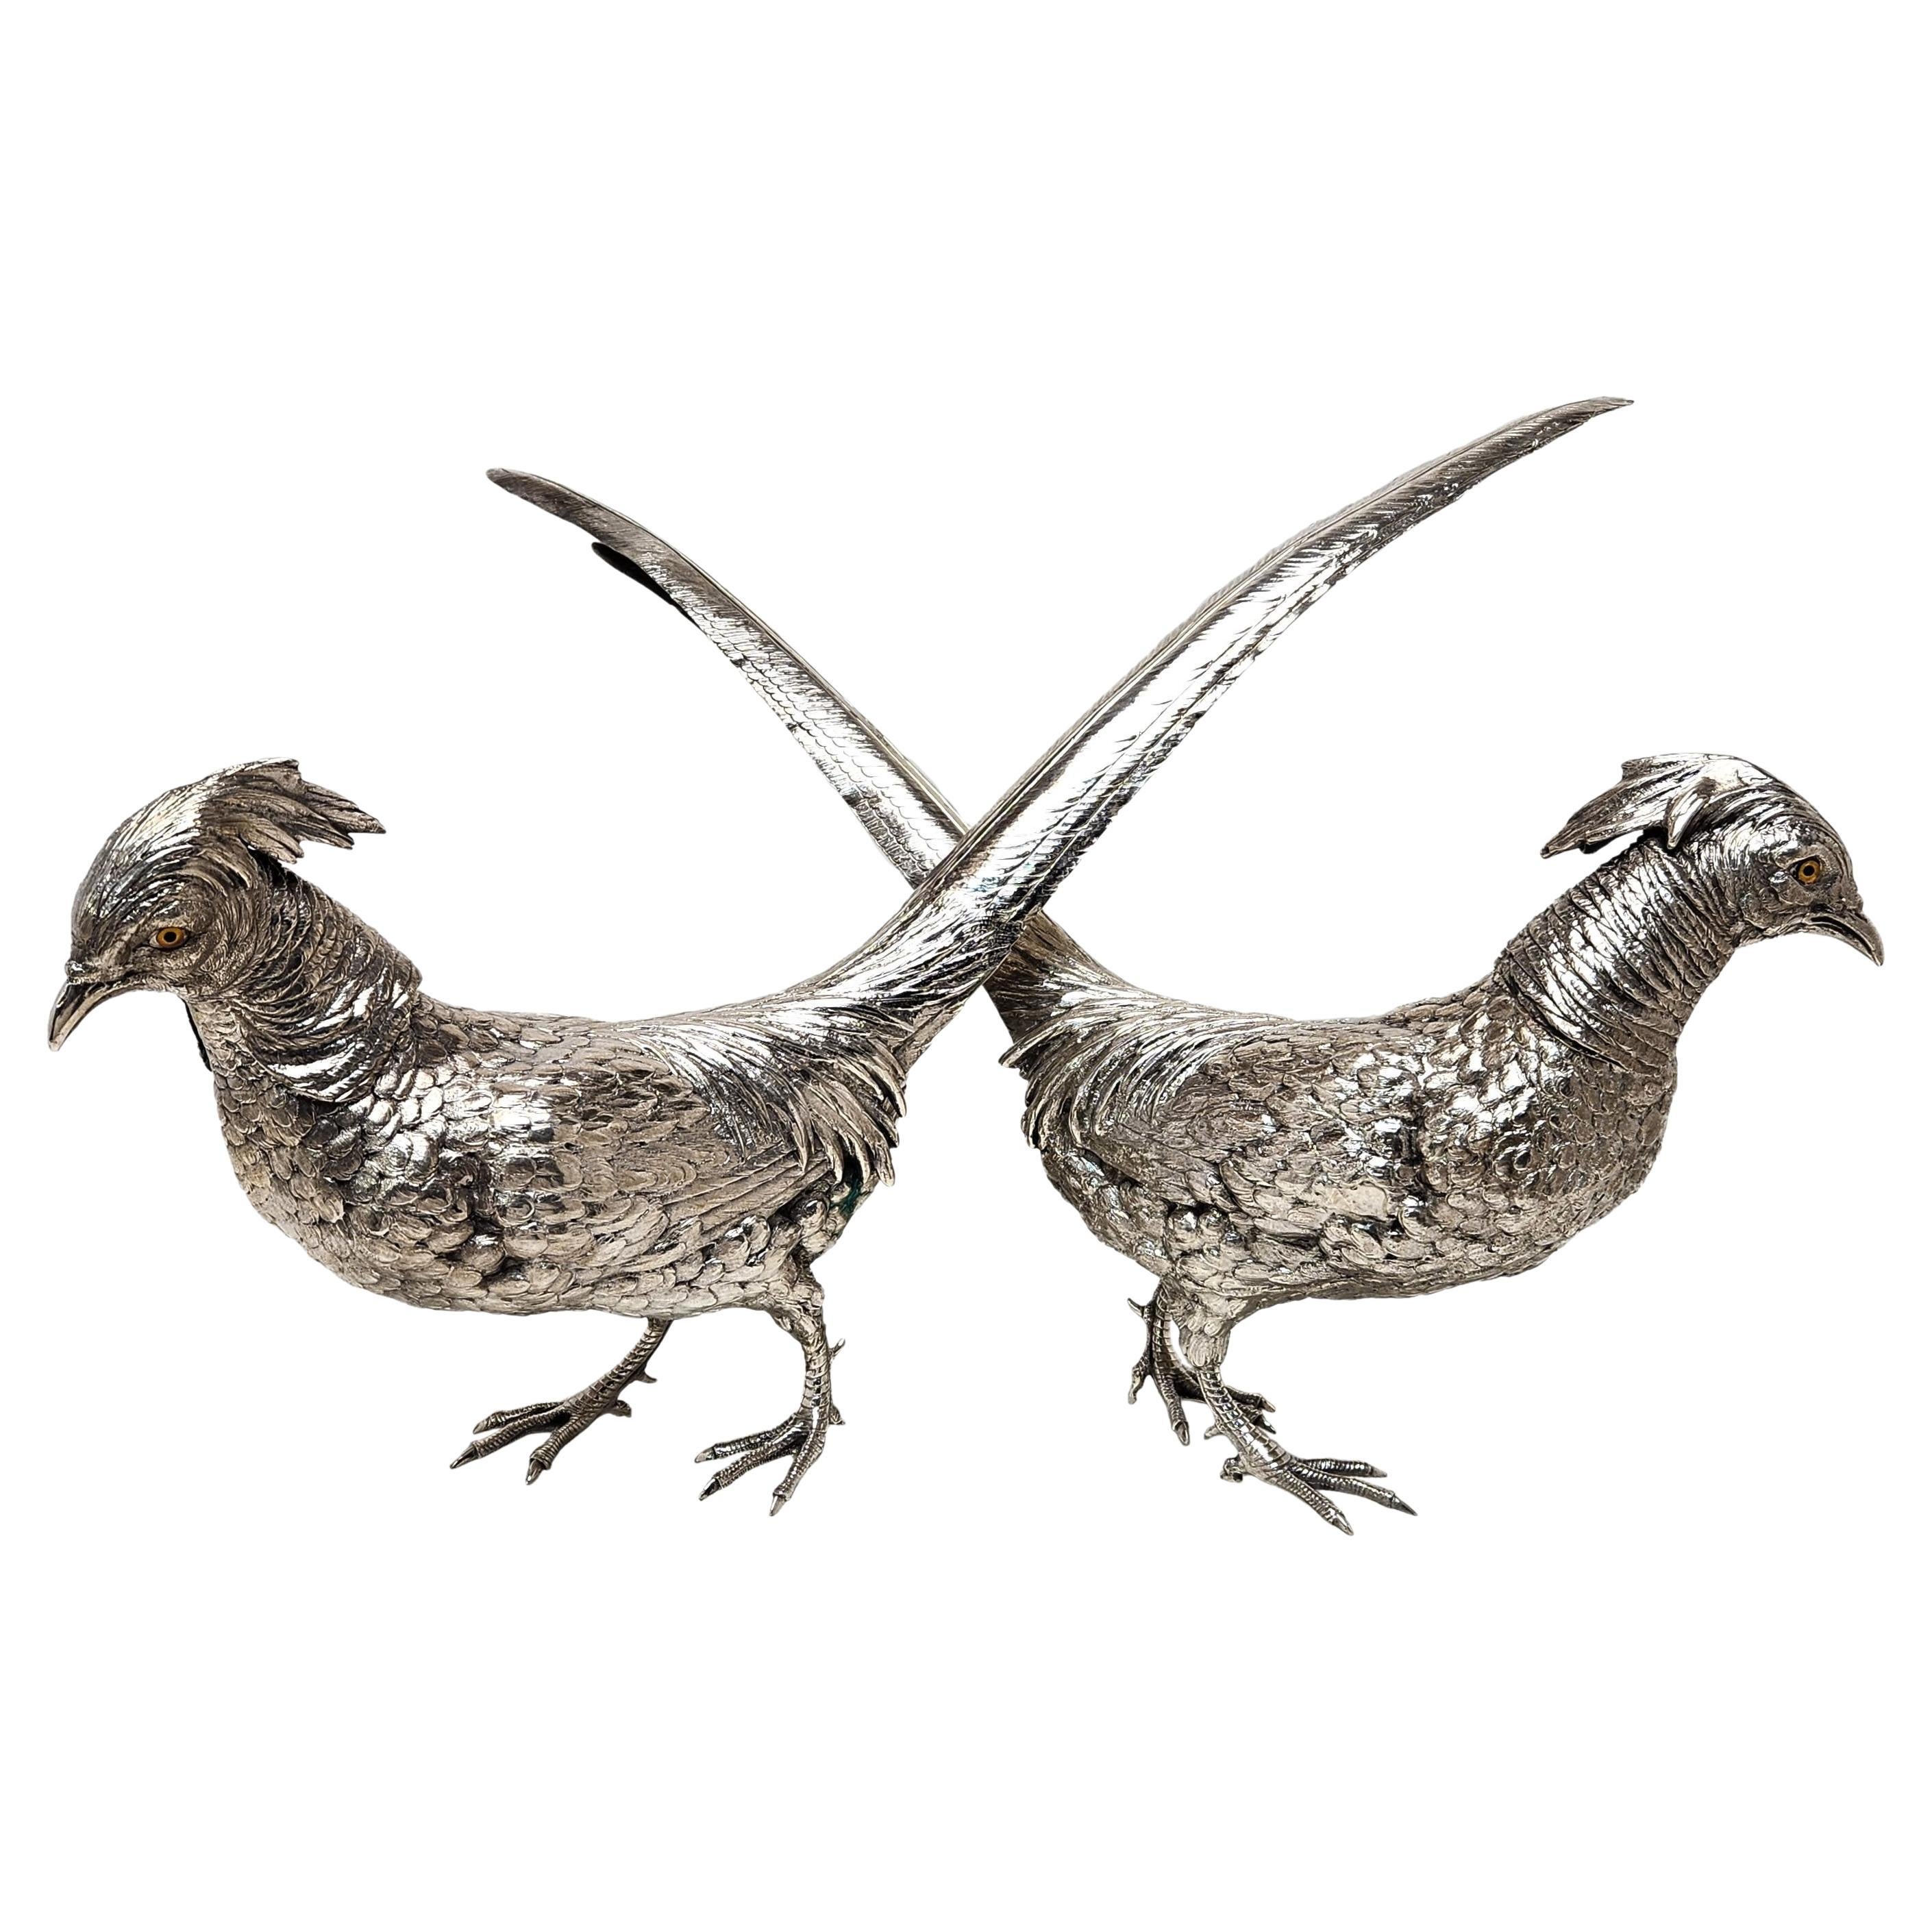 Pair Large Antique Silver Pheasants Model Bird Figurines Germany c. 1890 For Sale